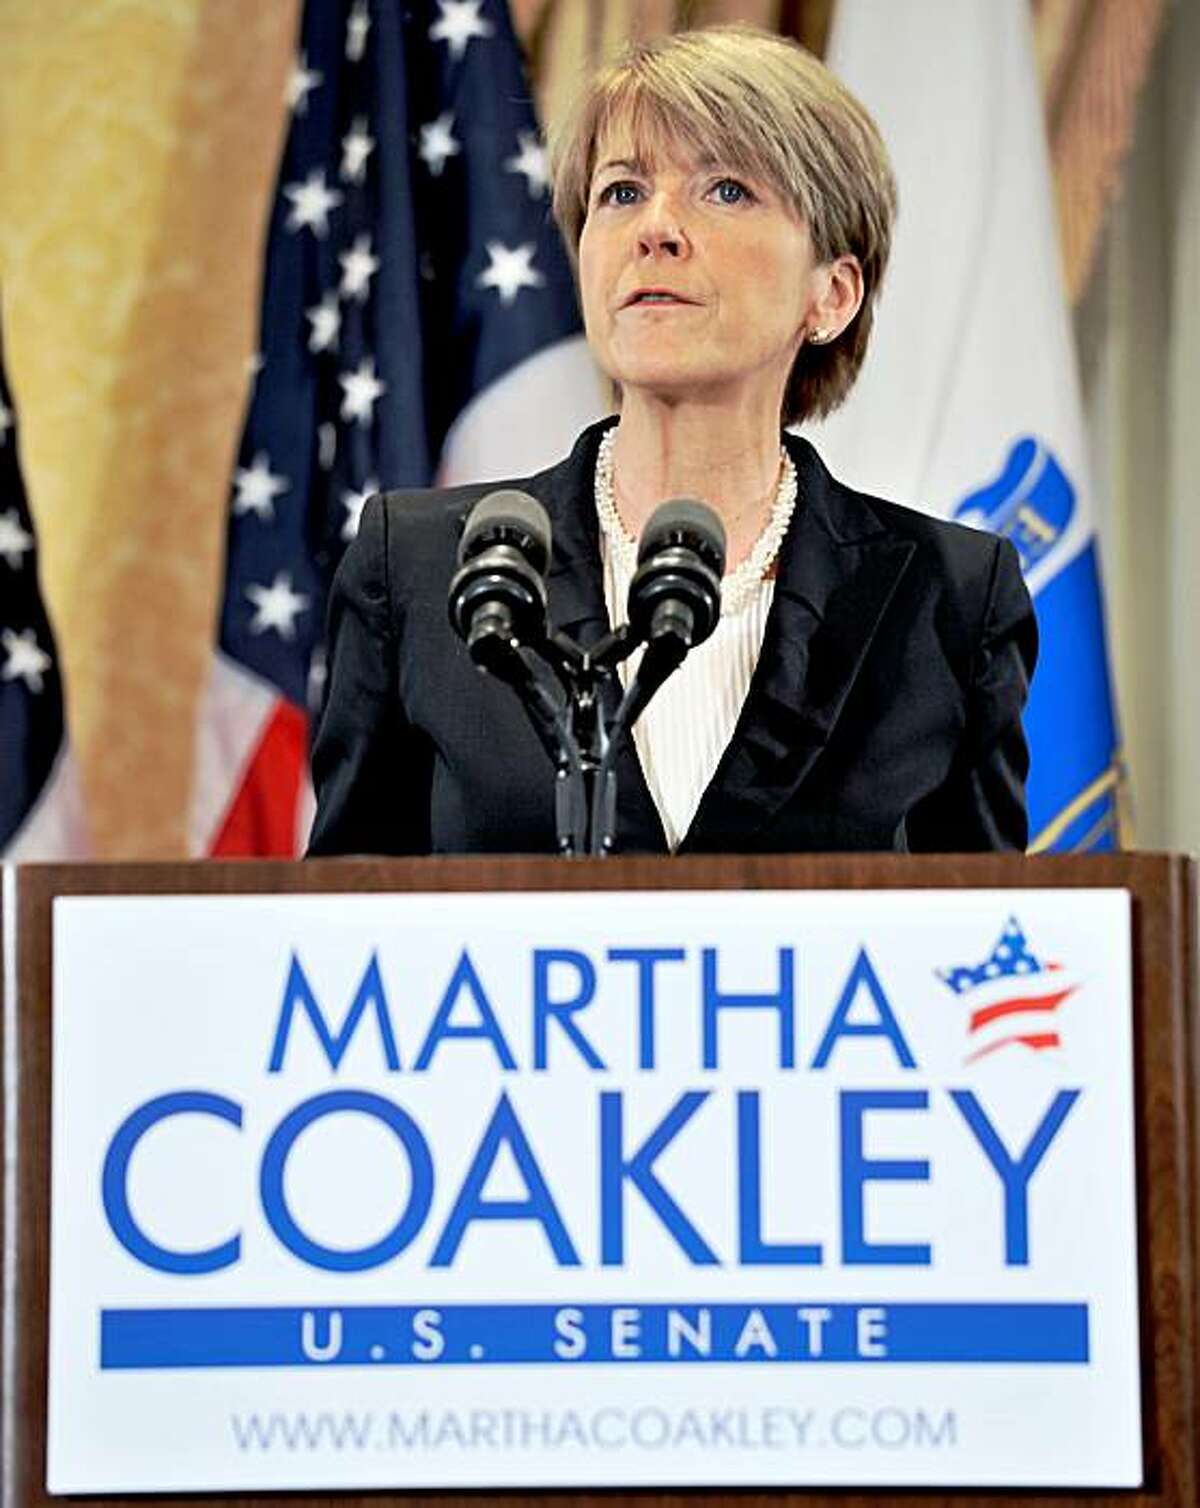 Massachusetts Attorney General Martha Coakley speaks to reporters in Boston, Thursday, Sept. 3, 2009, where she declared herself a Democratic candidate in the special election to succeed the late Sen. Edward M. Kennedy. Kennedy died last week of brain cancer at age 77. (AP Photo/Josh Reynolds)